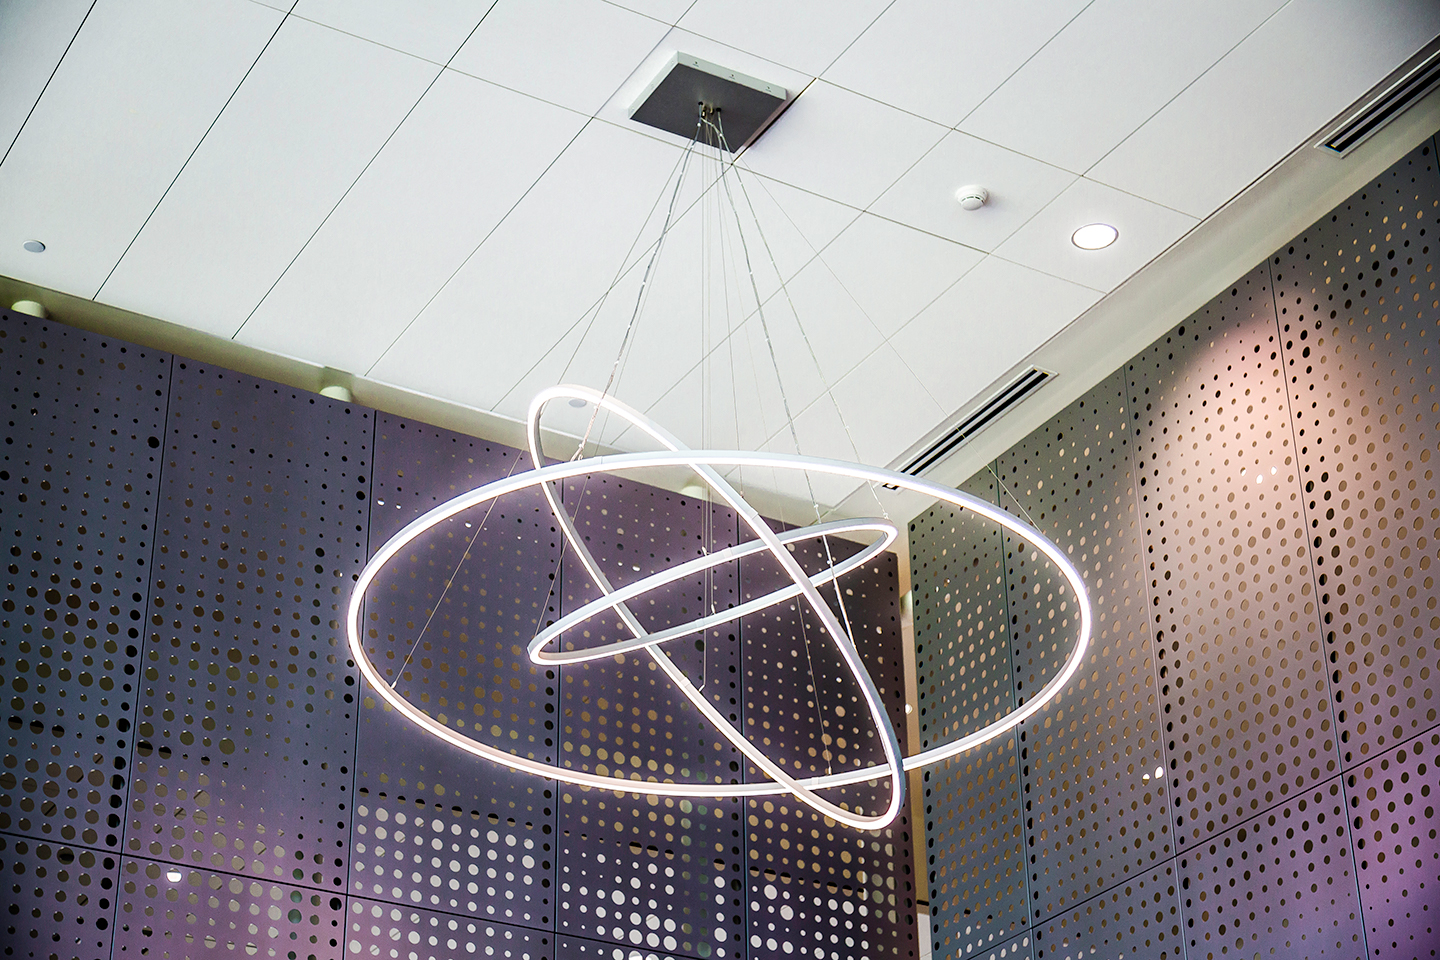 A sun-inspired lighting fixture provides a focal point in the center. Internal and exterior murals cover three sides of the building, catching the sunlight and creating the illusion of comets moving through the cosmos.